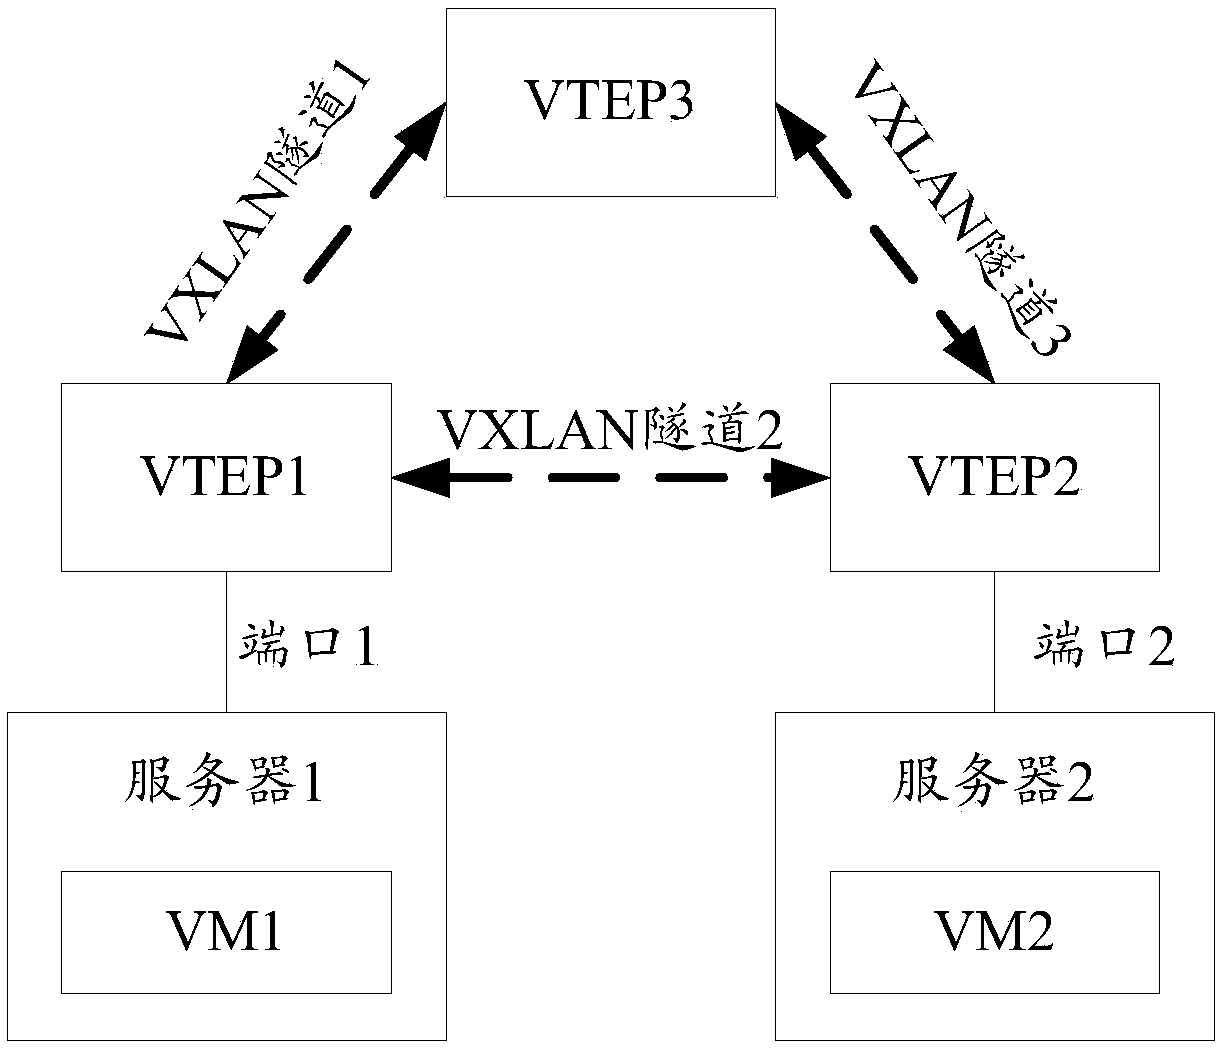 A method and apparatus for anti-spoofing in a VXLAN